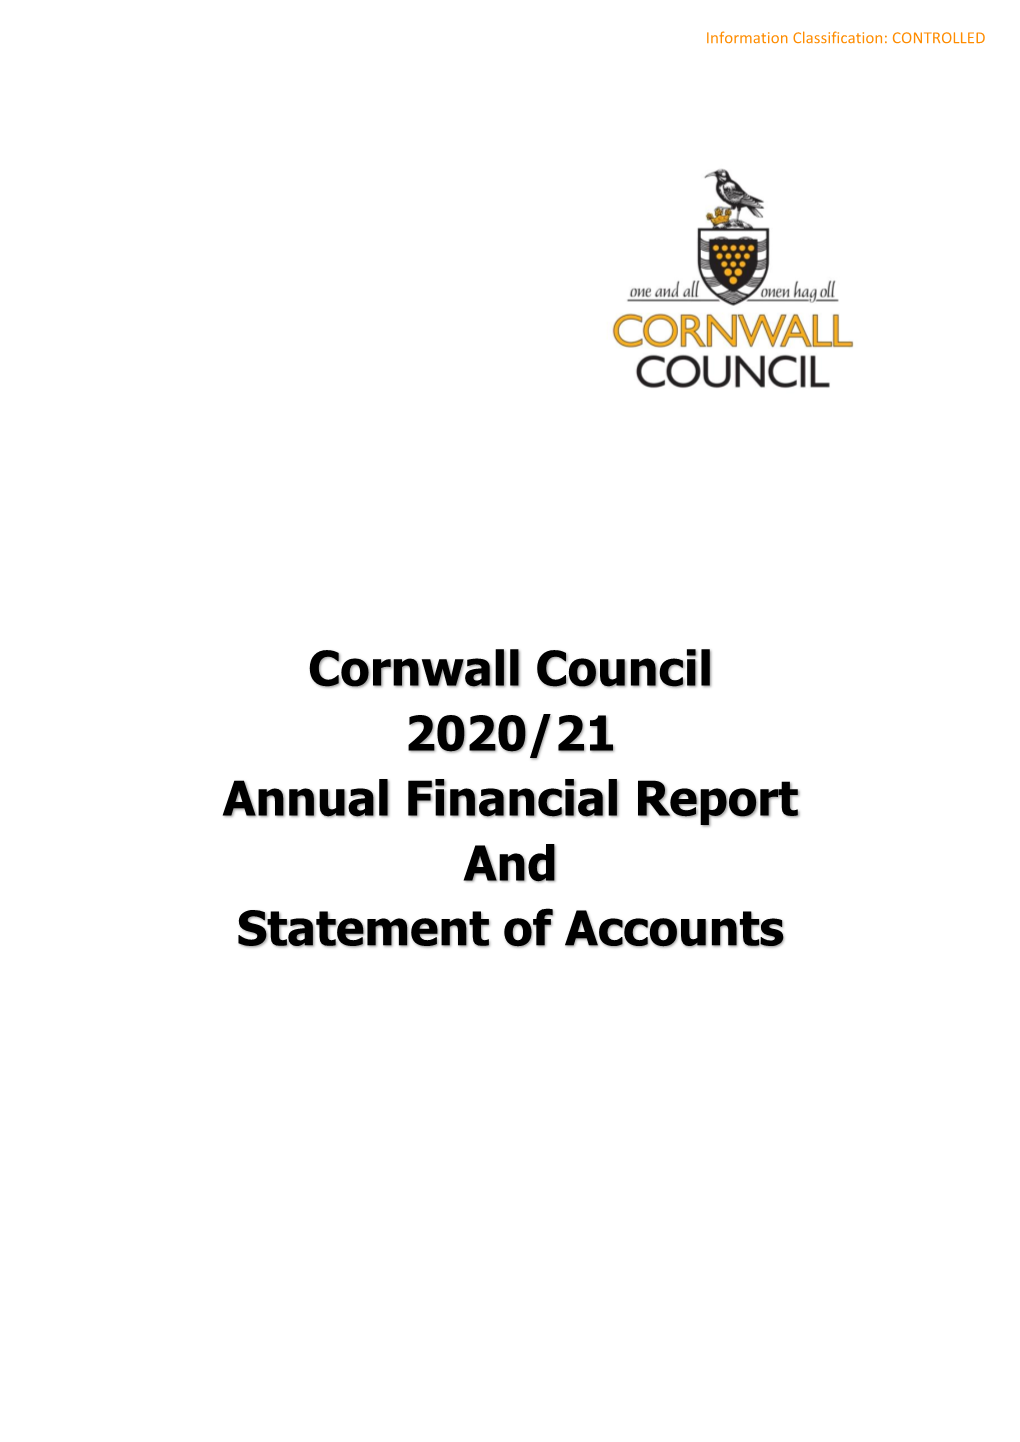 Cornwall Council Statement of Accounts 2020/21 (Draft)